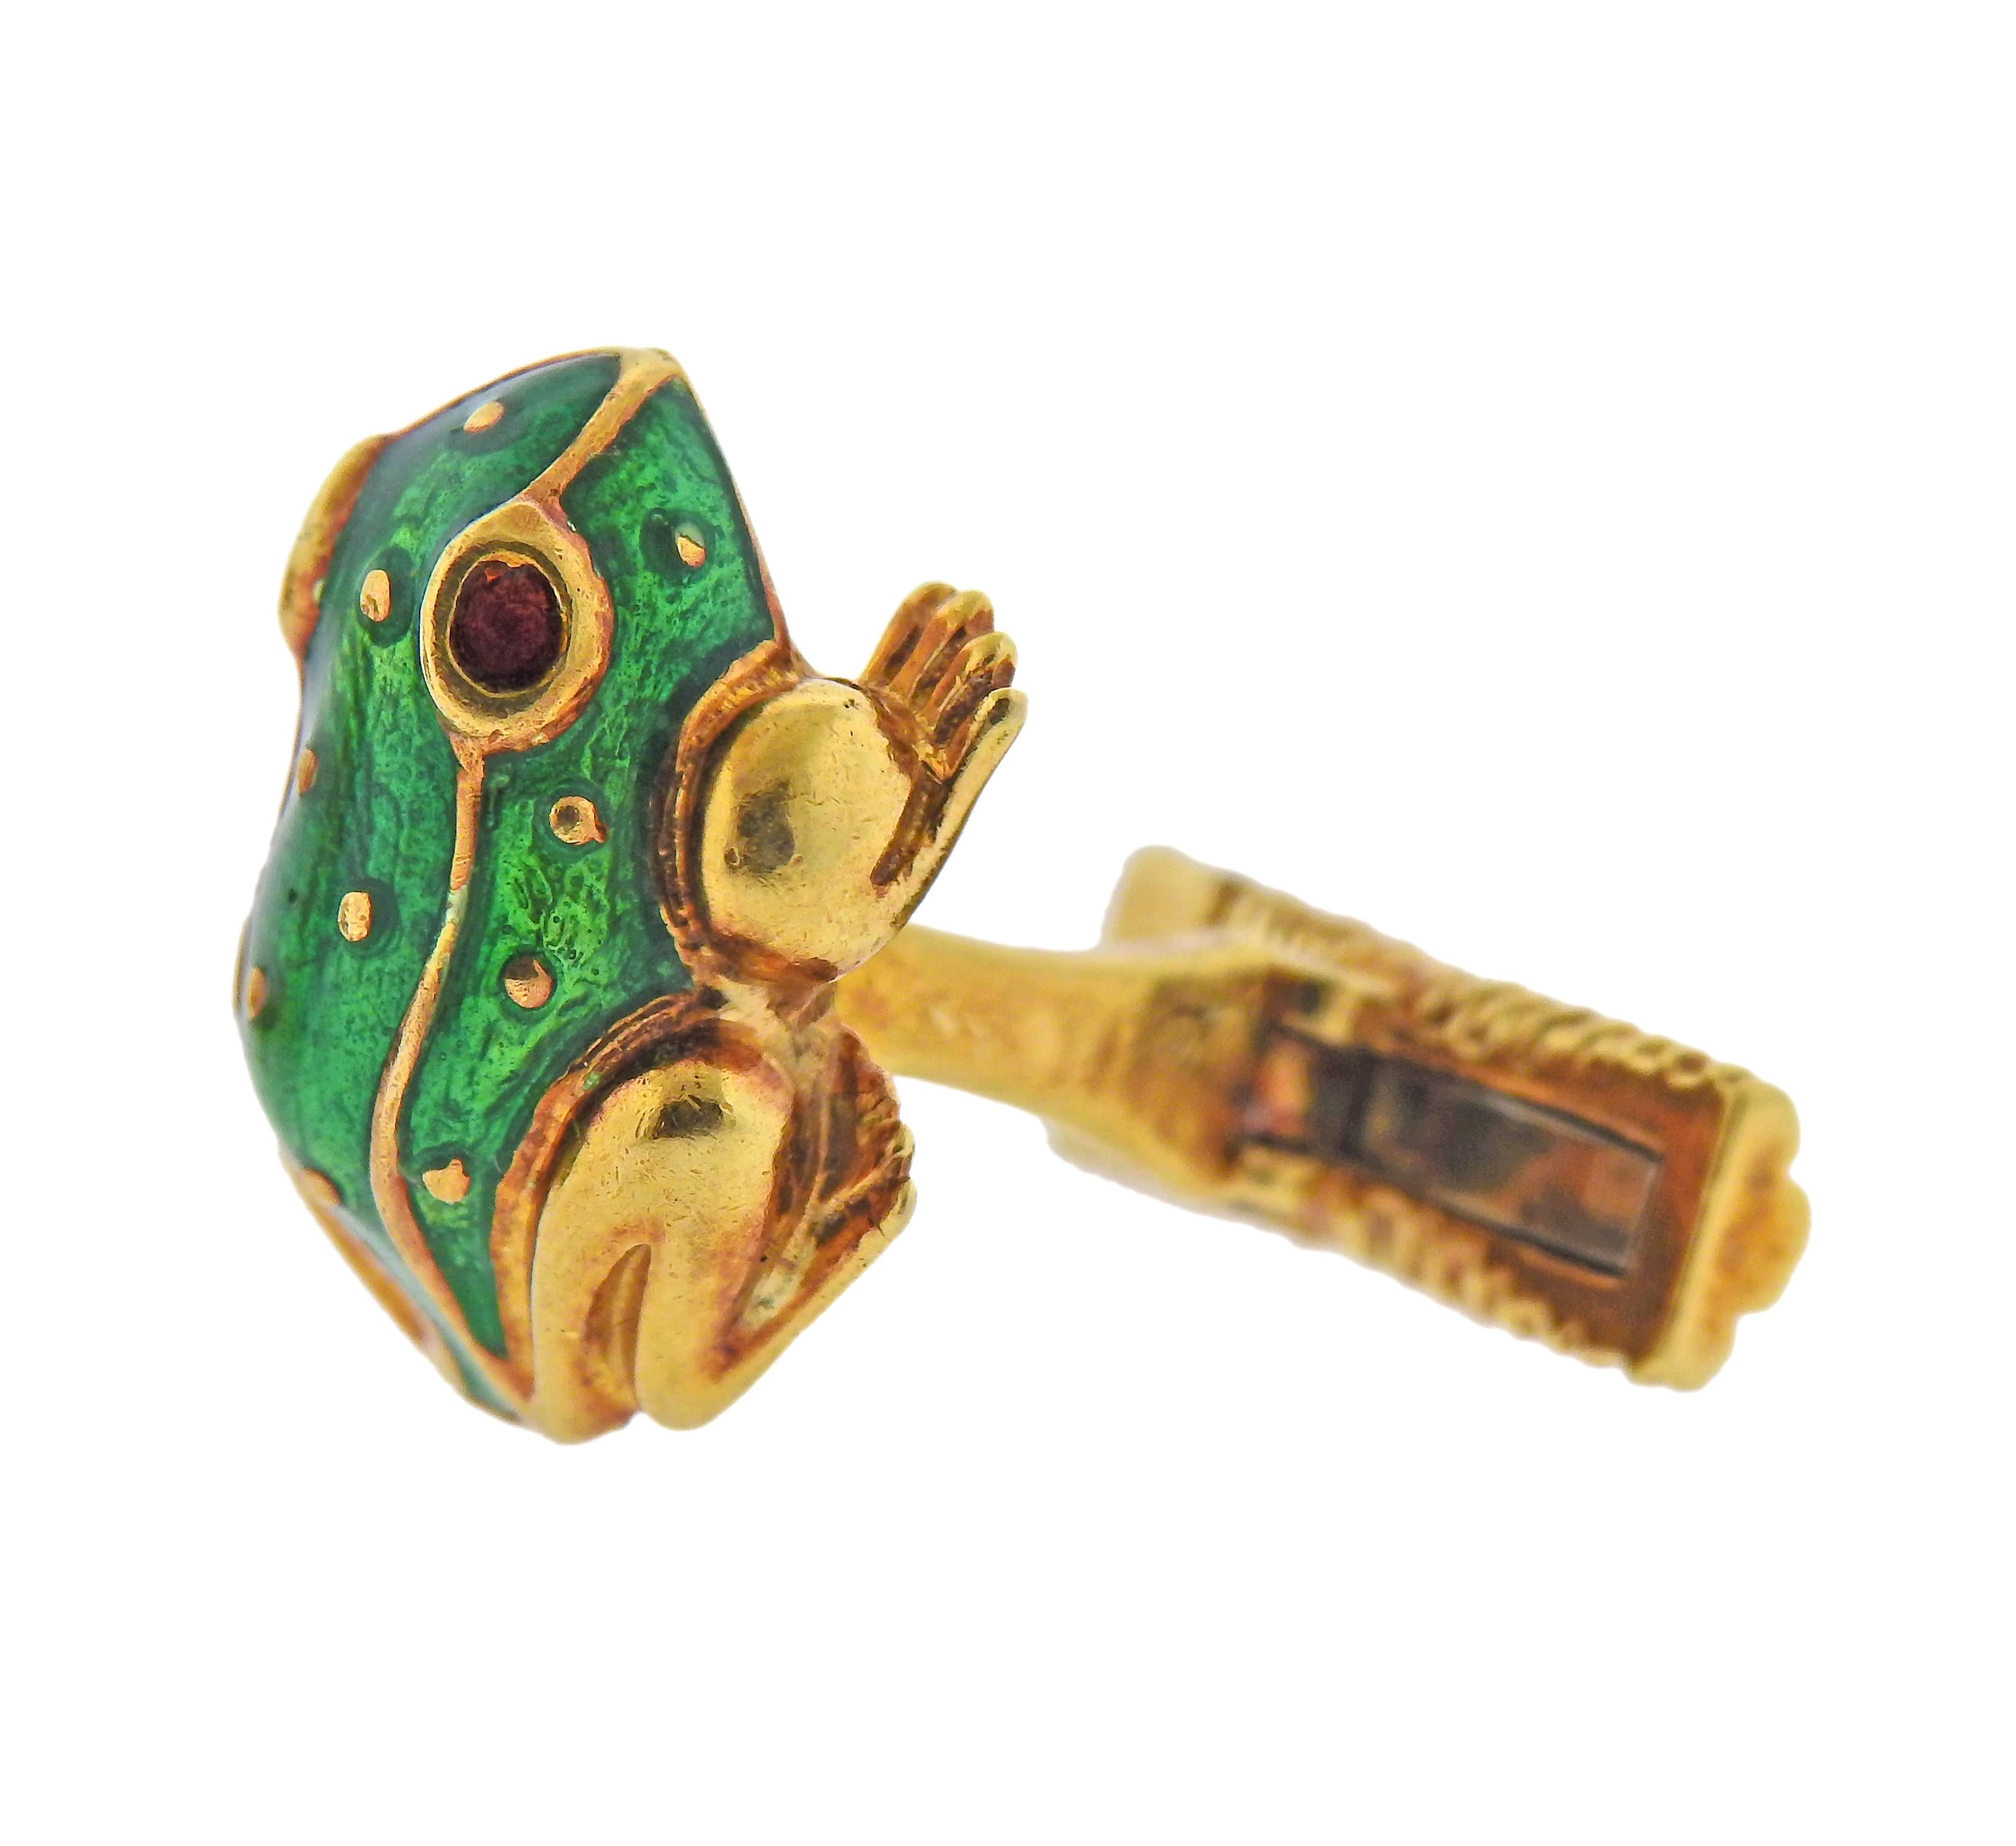 Pair of 18k gold frog cufflinks by David Webb, decorated with enamel. Cufflink measures 18mm x 15mm. Marked: Webb 18k. Weight - 22.3 grams. 